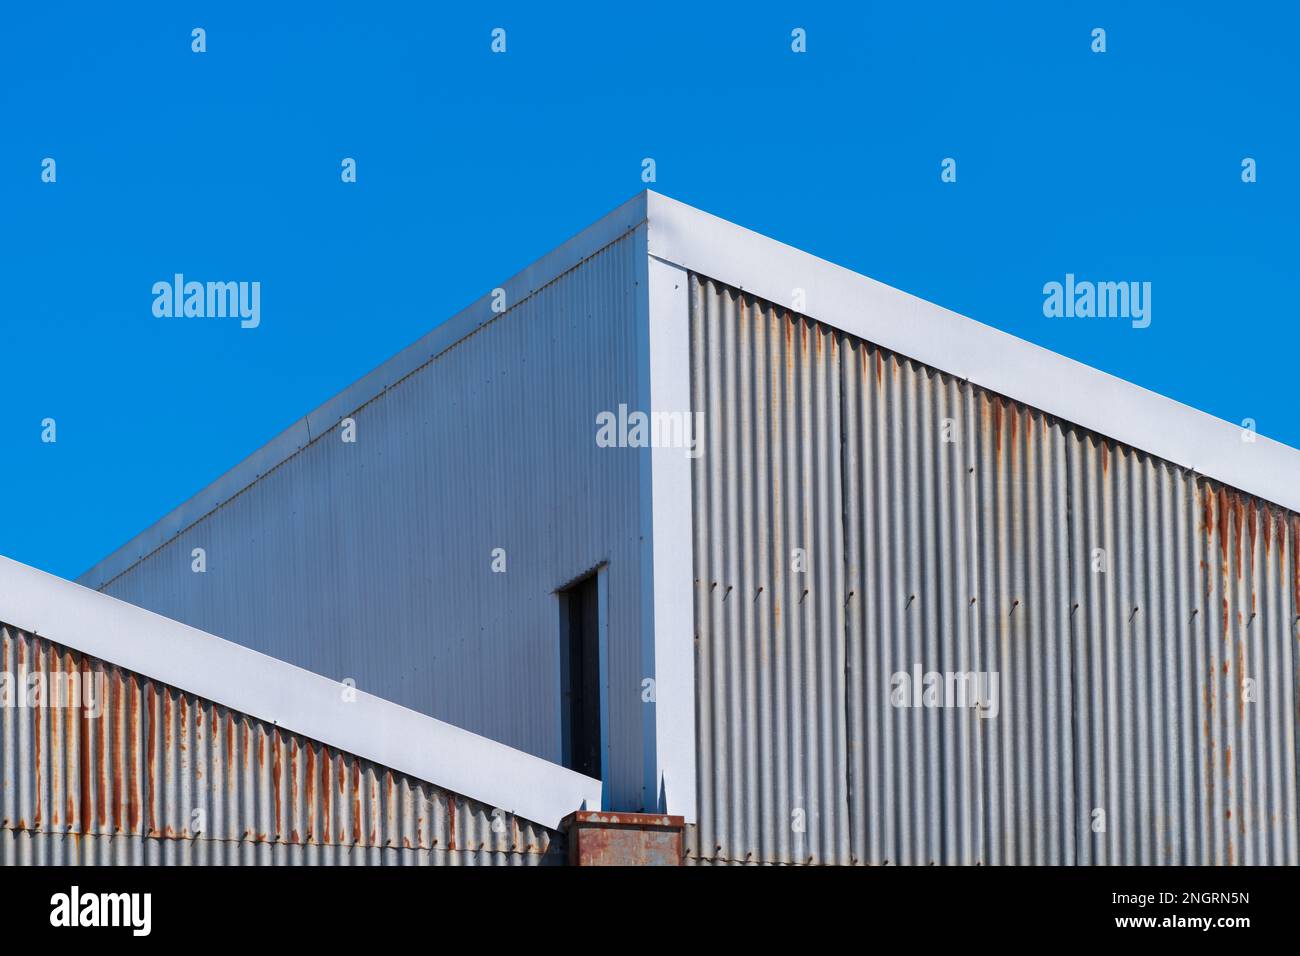 Metal corrugated iron factory wall and rooftop with a blue cloudless sky in Castlemaine Australia. Stock Photo